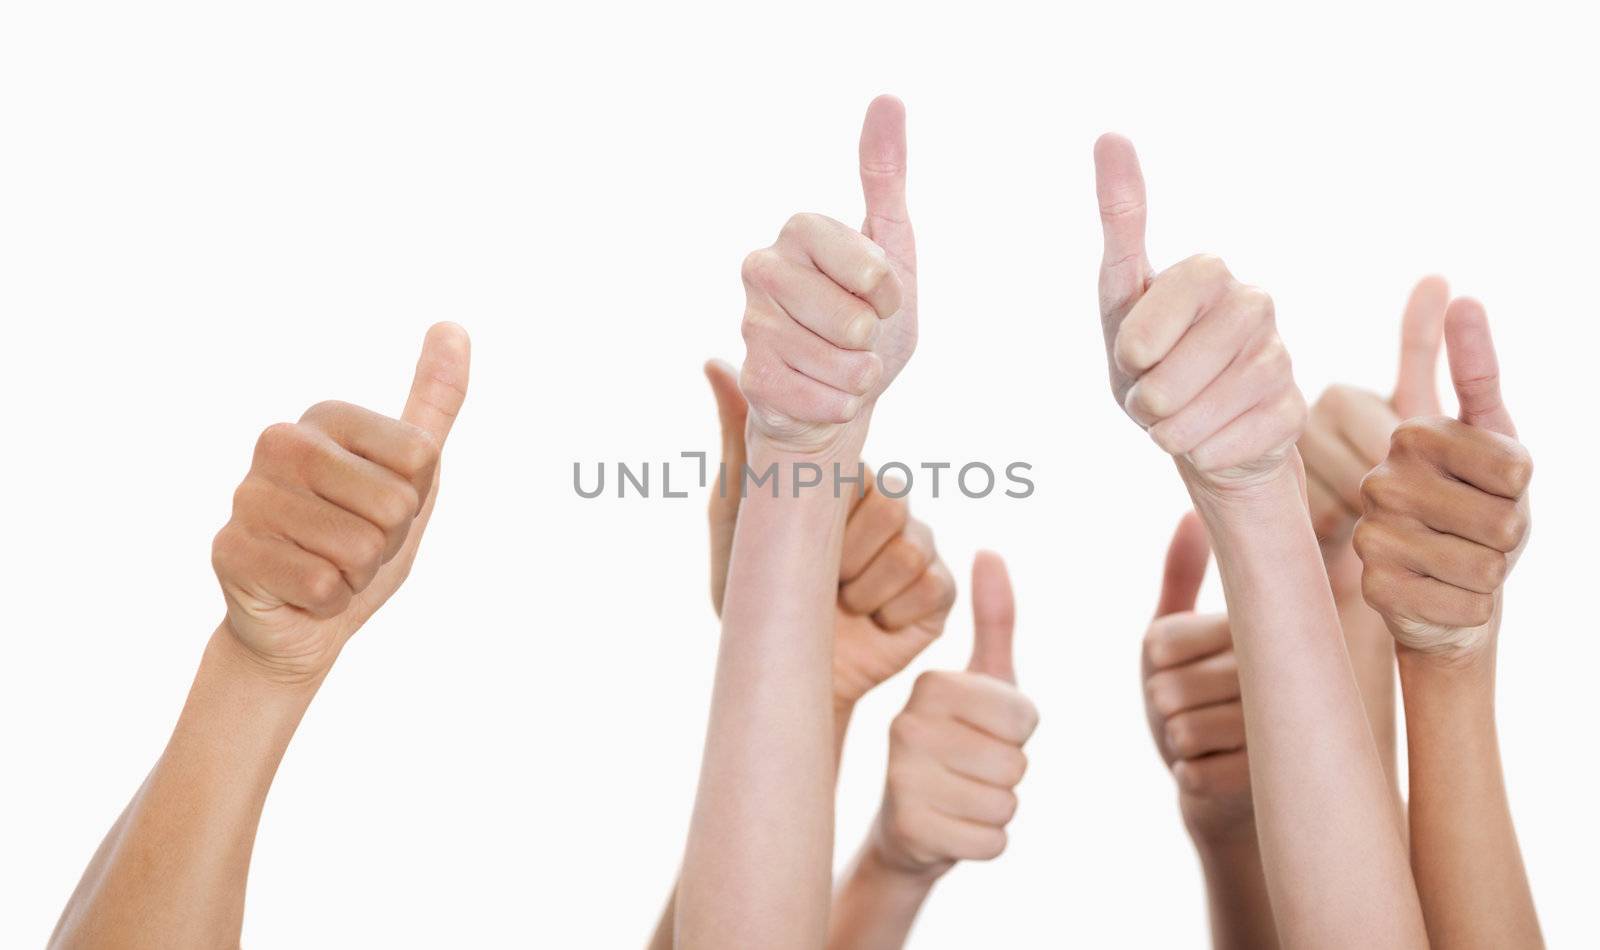 Hands up and thumbs raised by Wavebreakmedia